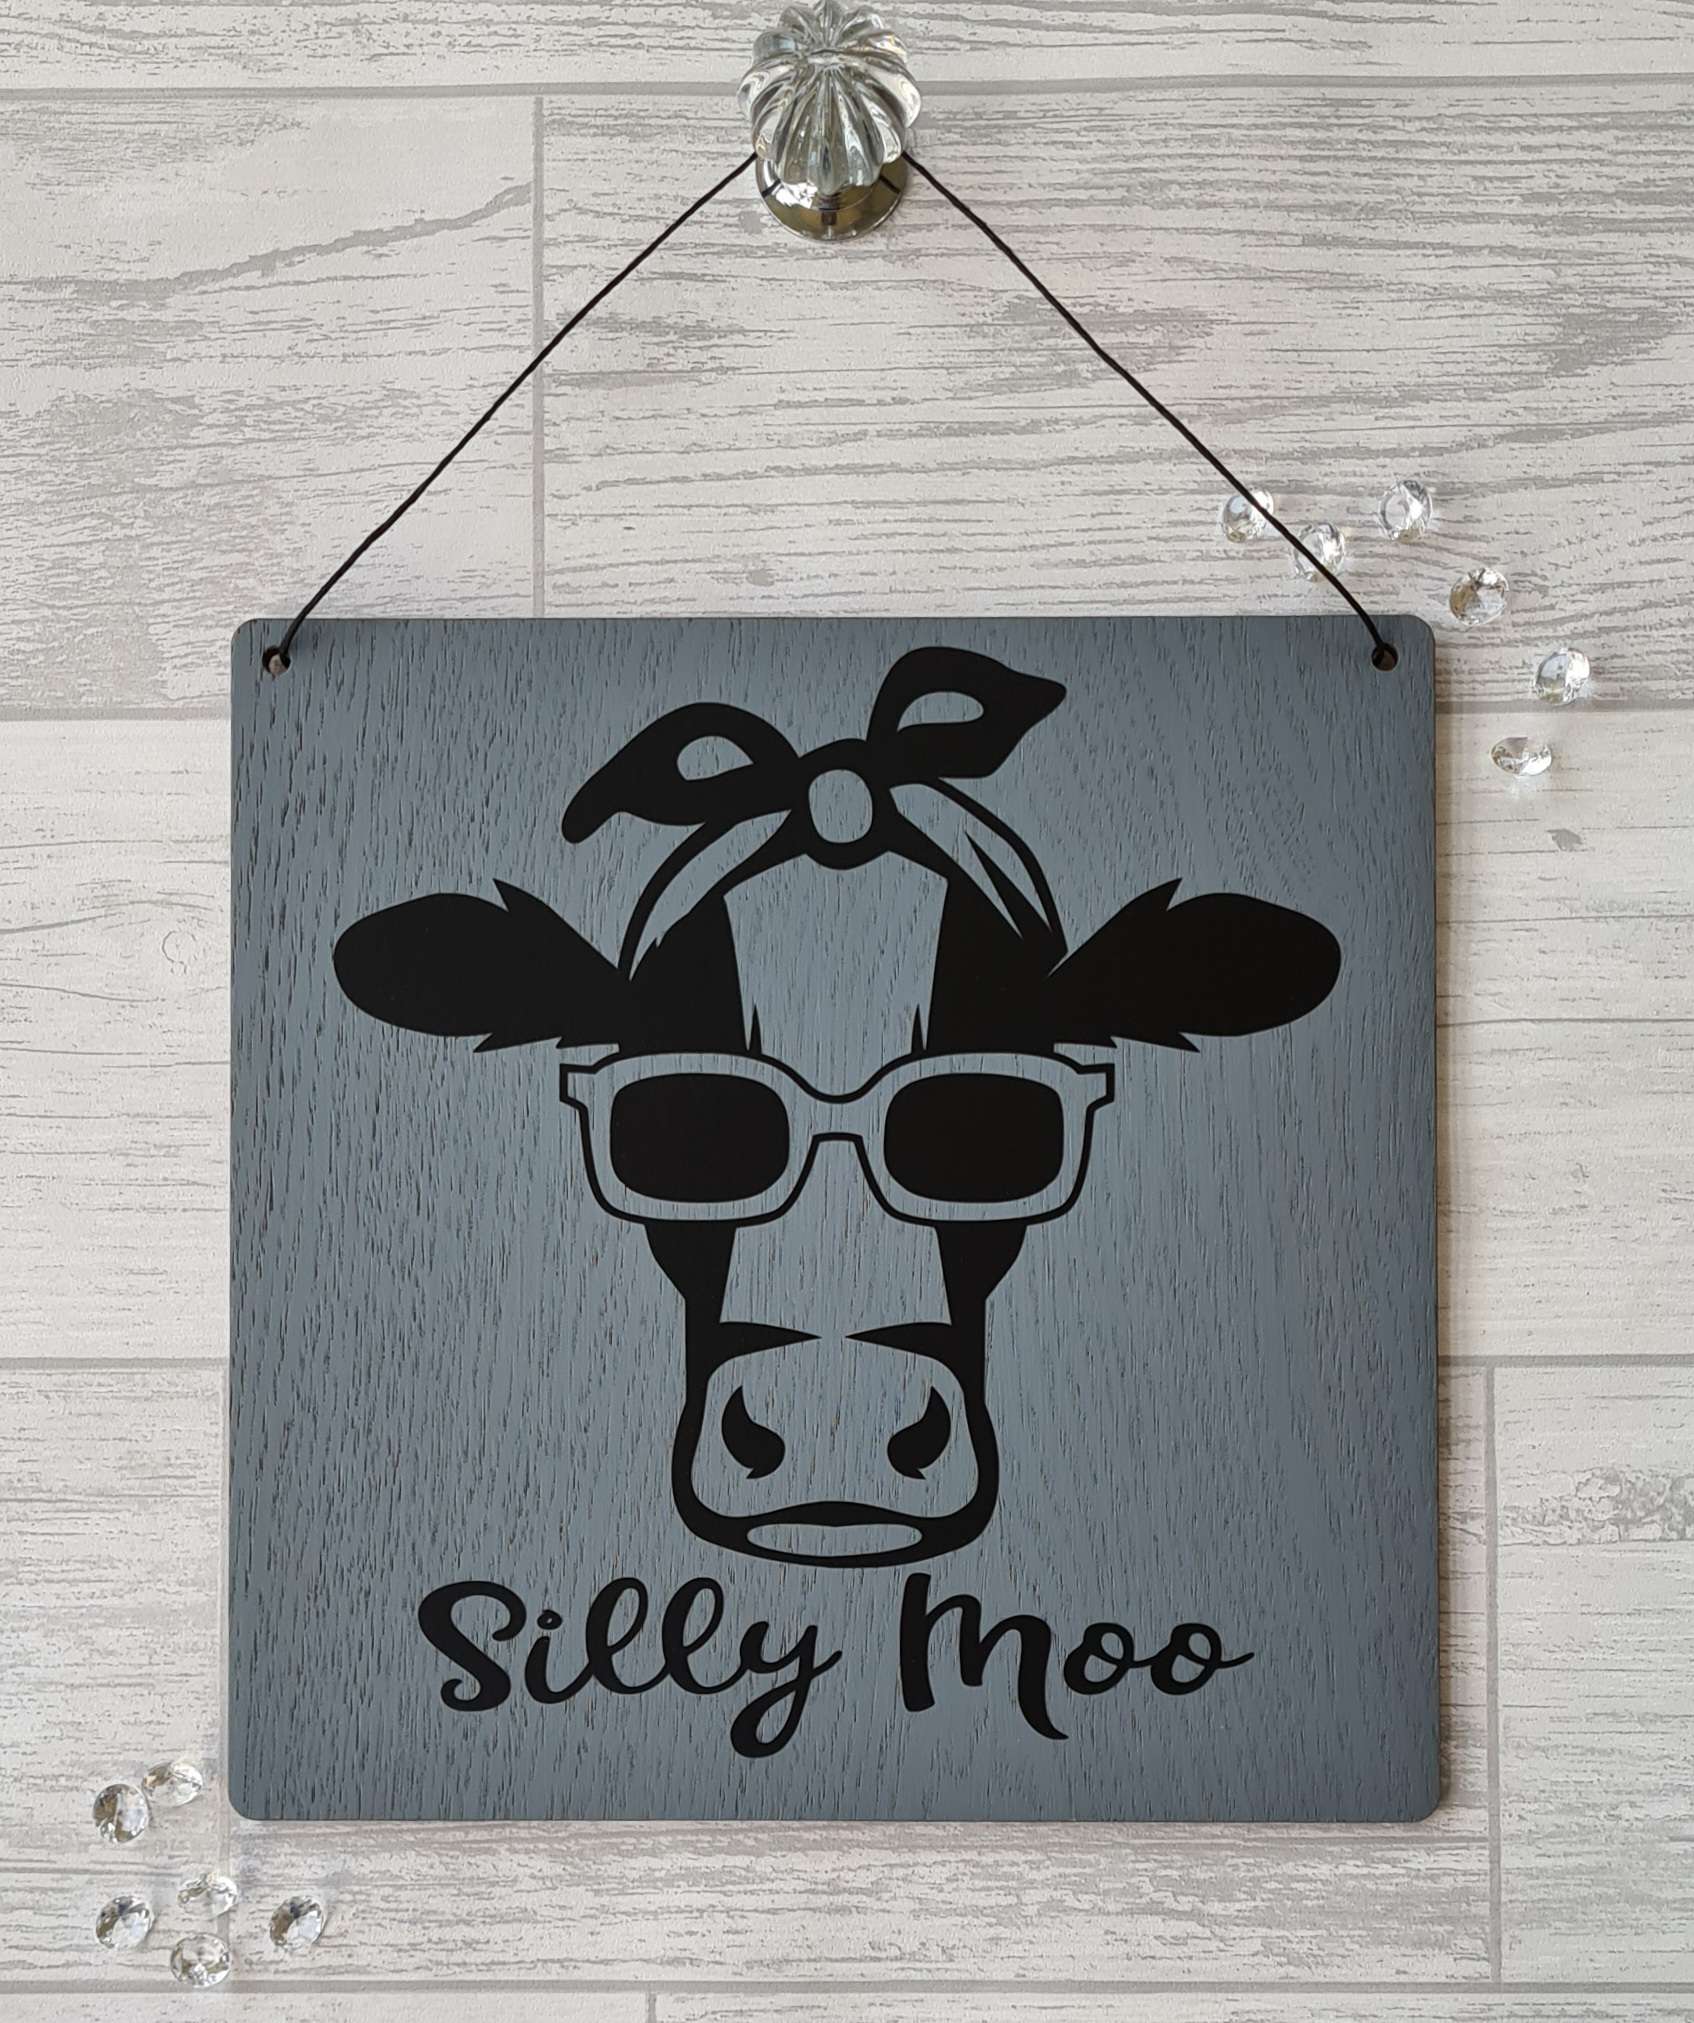 20201214 235726 Looking for a gift for a cow lover? A fun sign for the home. UK postage included - will be dispatched a week after order